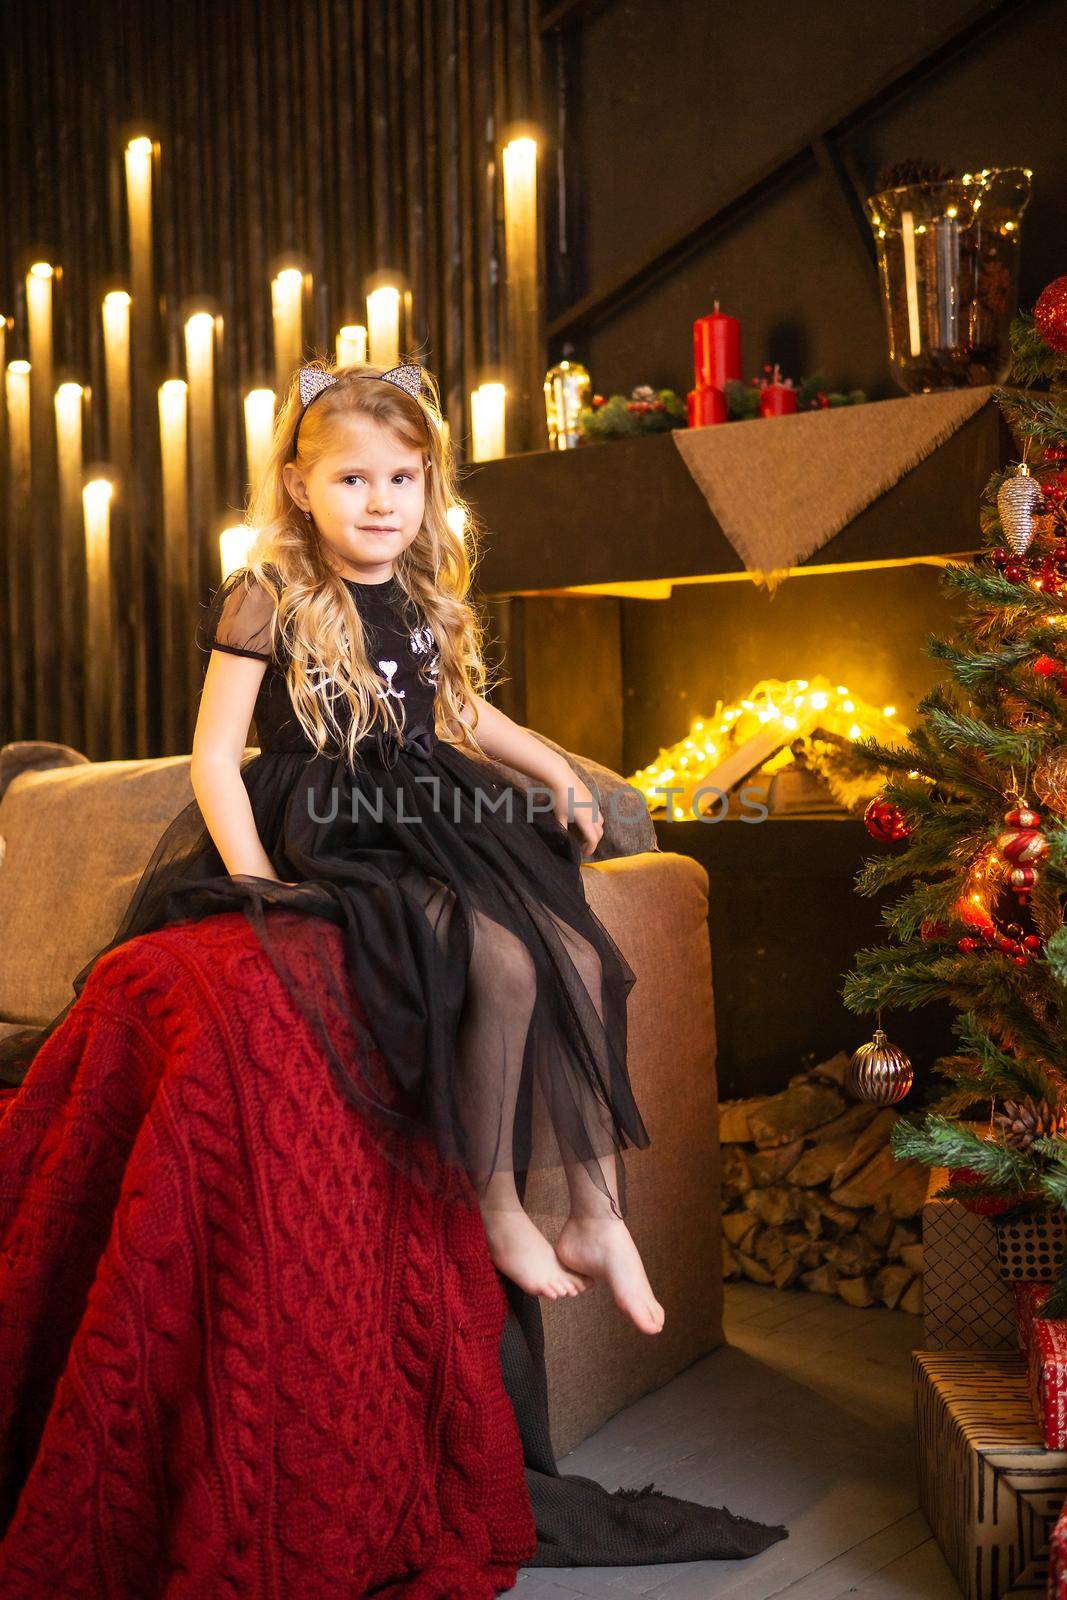 A girl in a festive outfit on the sofa with her dog next to a Christmas tree decorated with garlands, balloons and Christmas toys. The concept of winter holidays is Christmas and New Year holidays. Magical festive atmosphere.